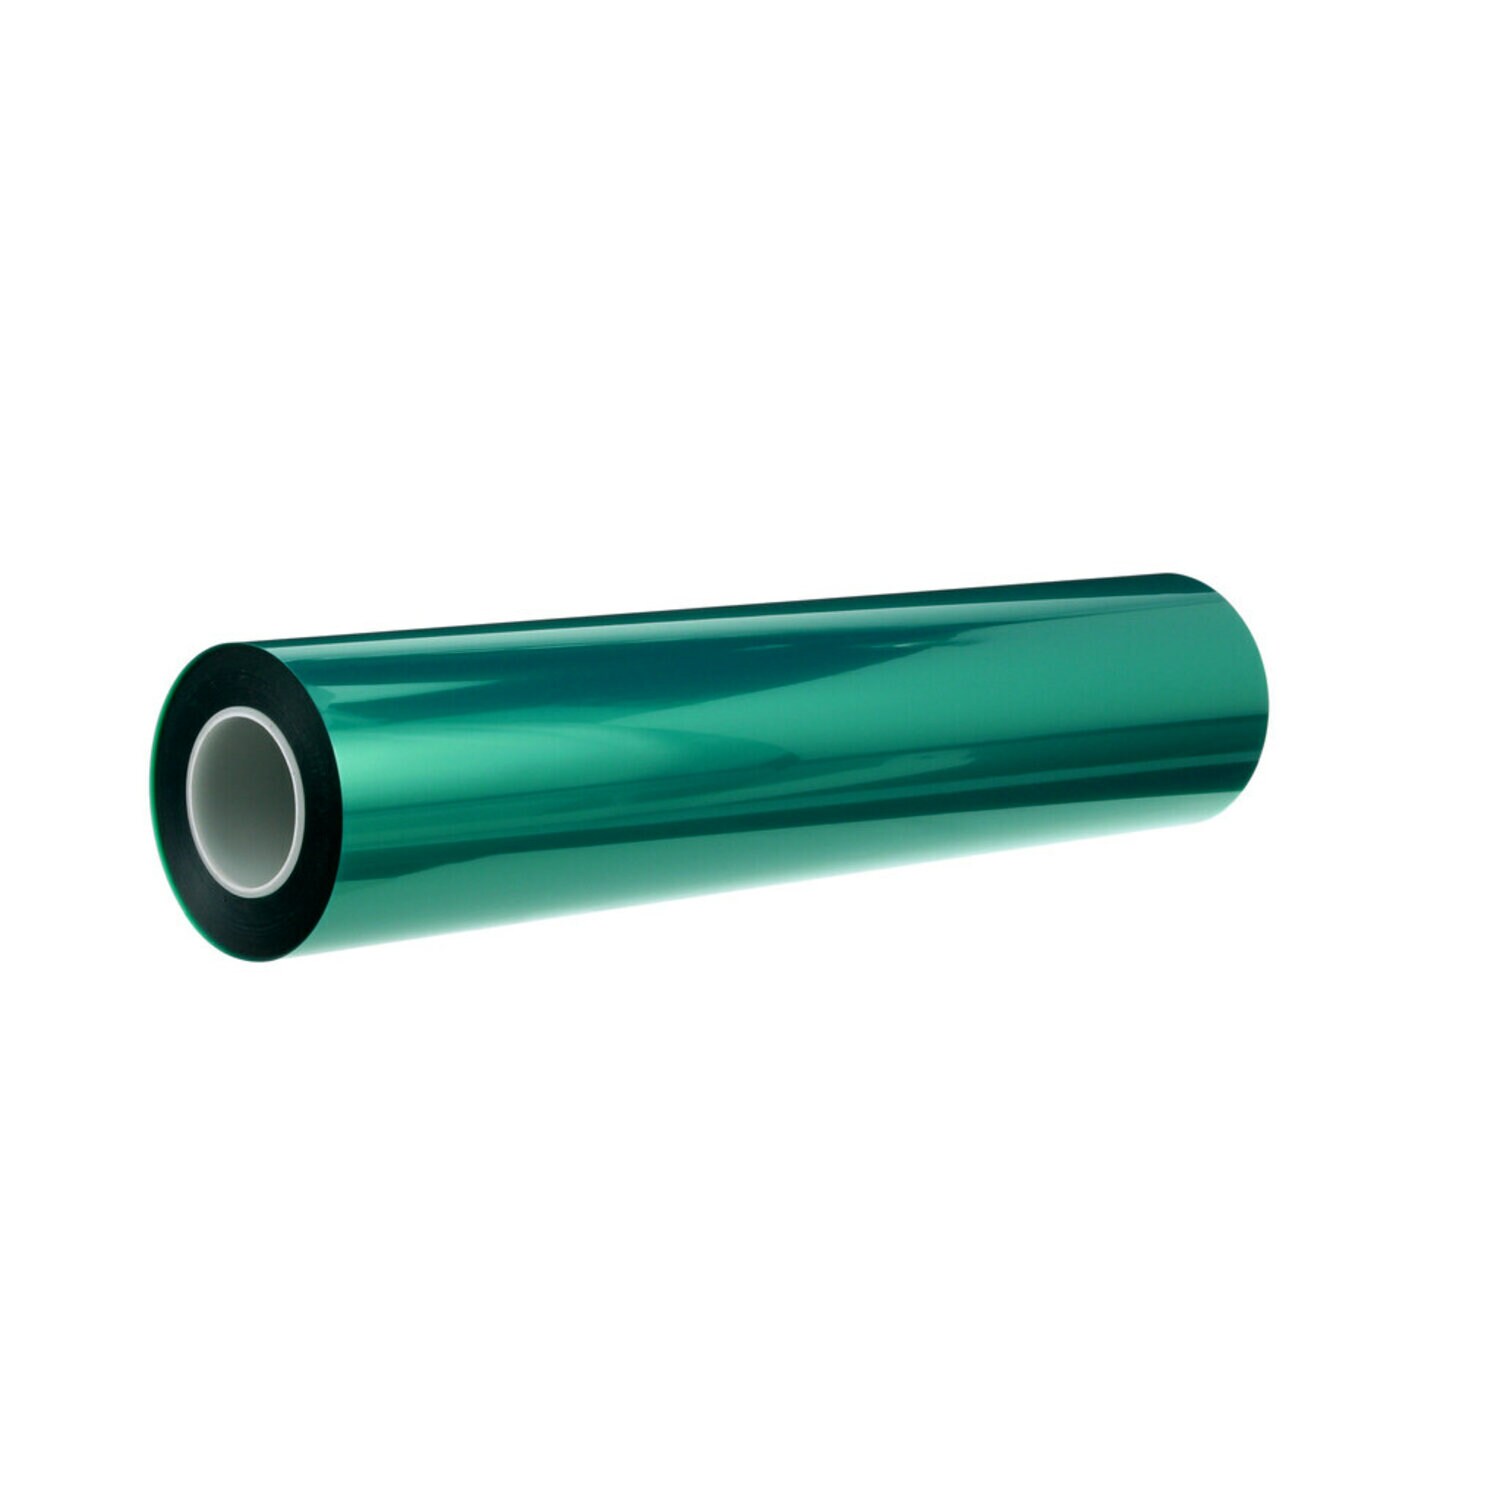 7010376278 - 3M Polyester Tape 8992, Green, 50.4 in x 500 yd, 3.2 mil, 1 roll per
case